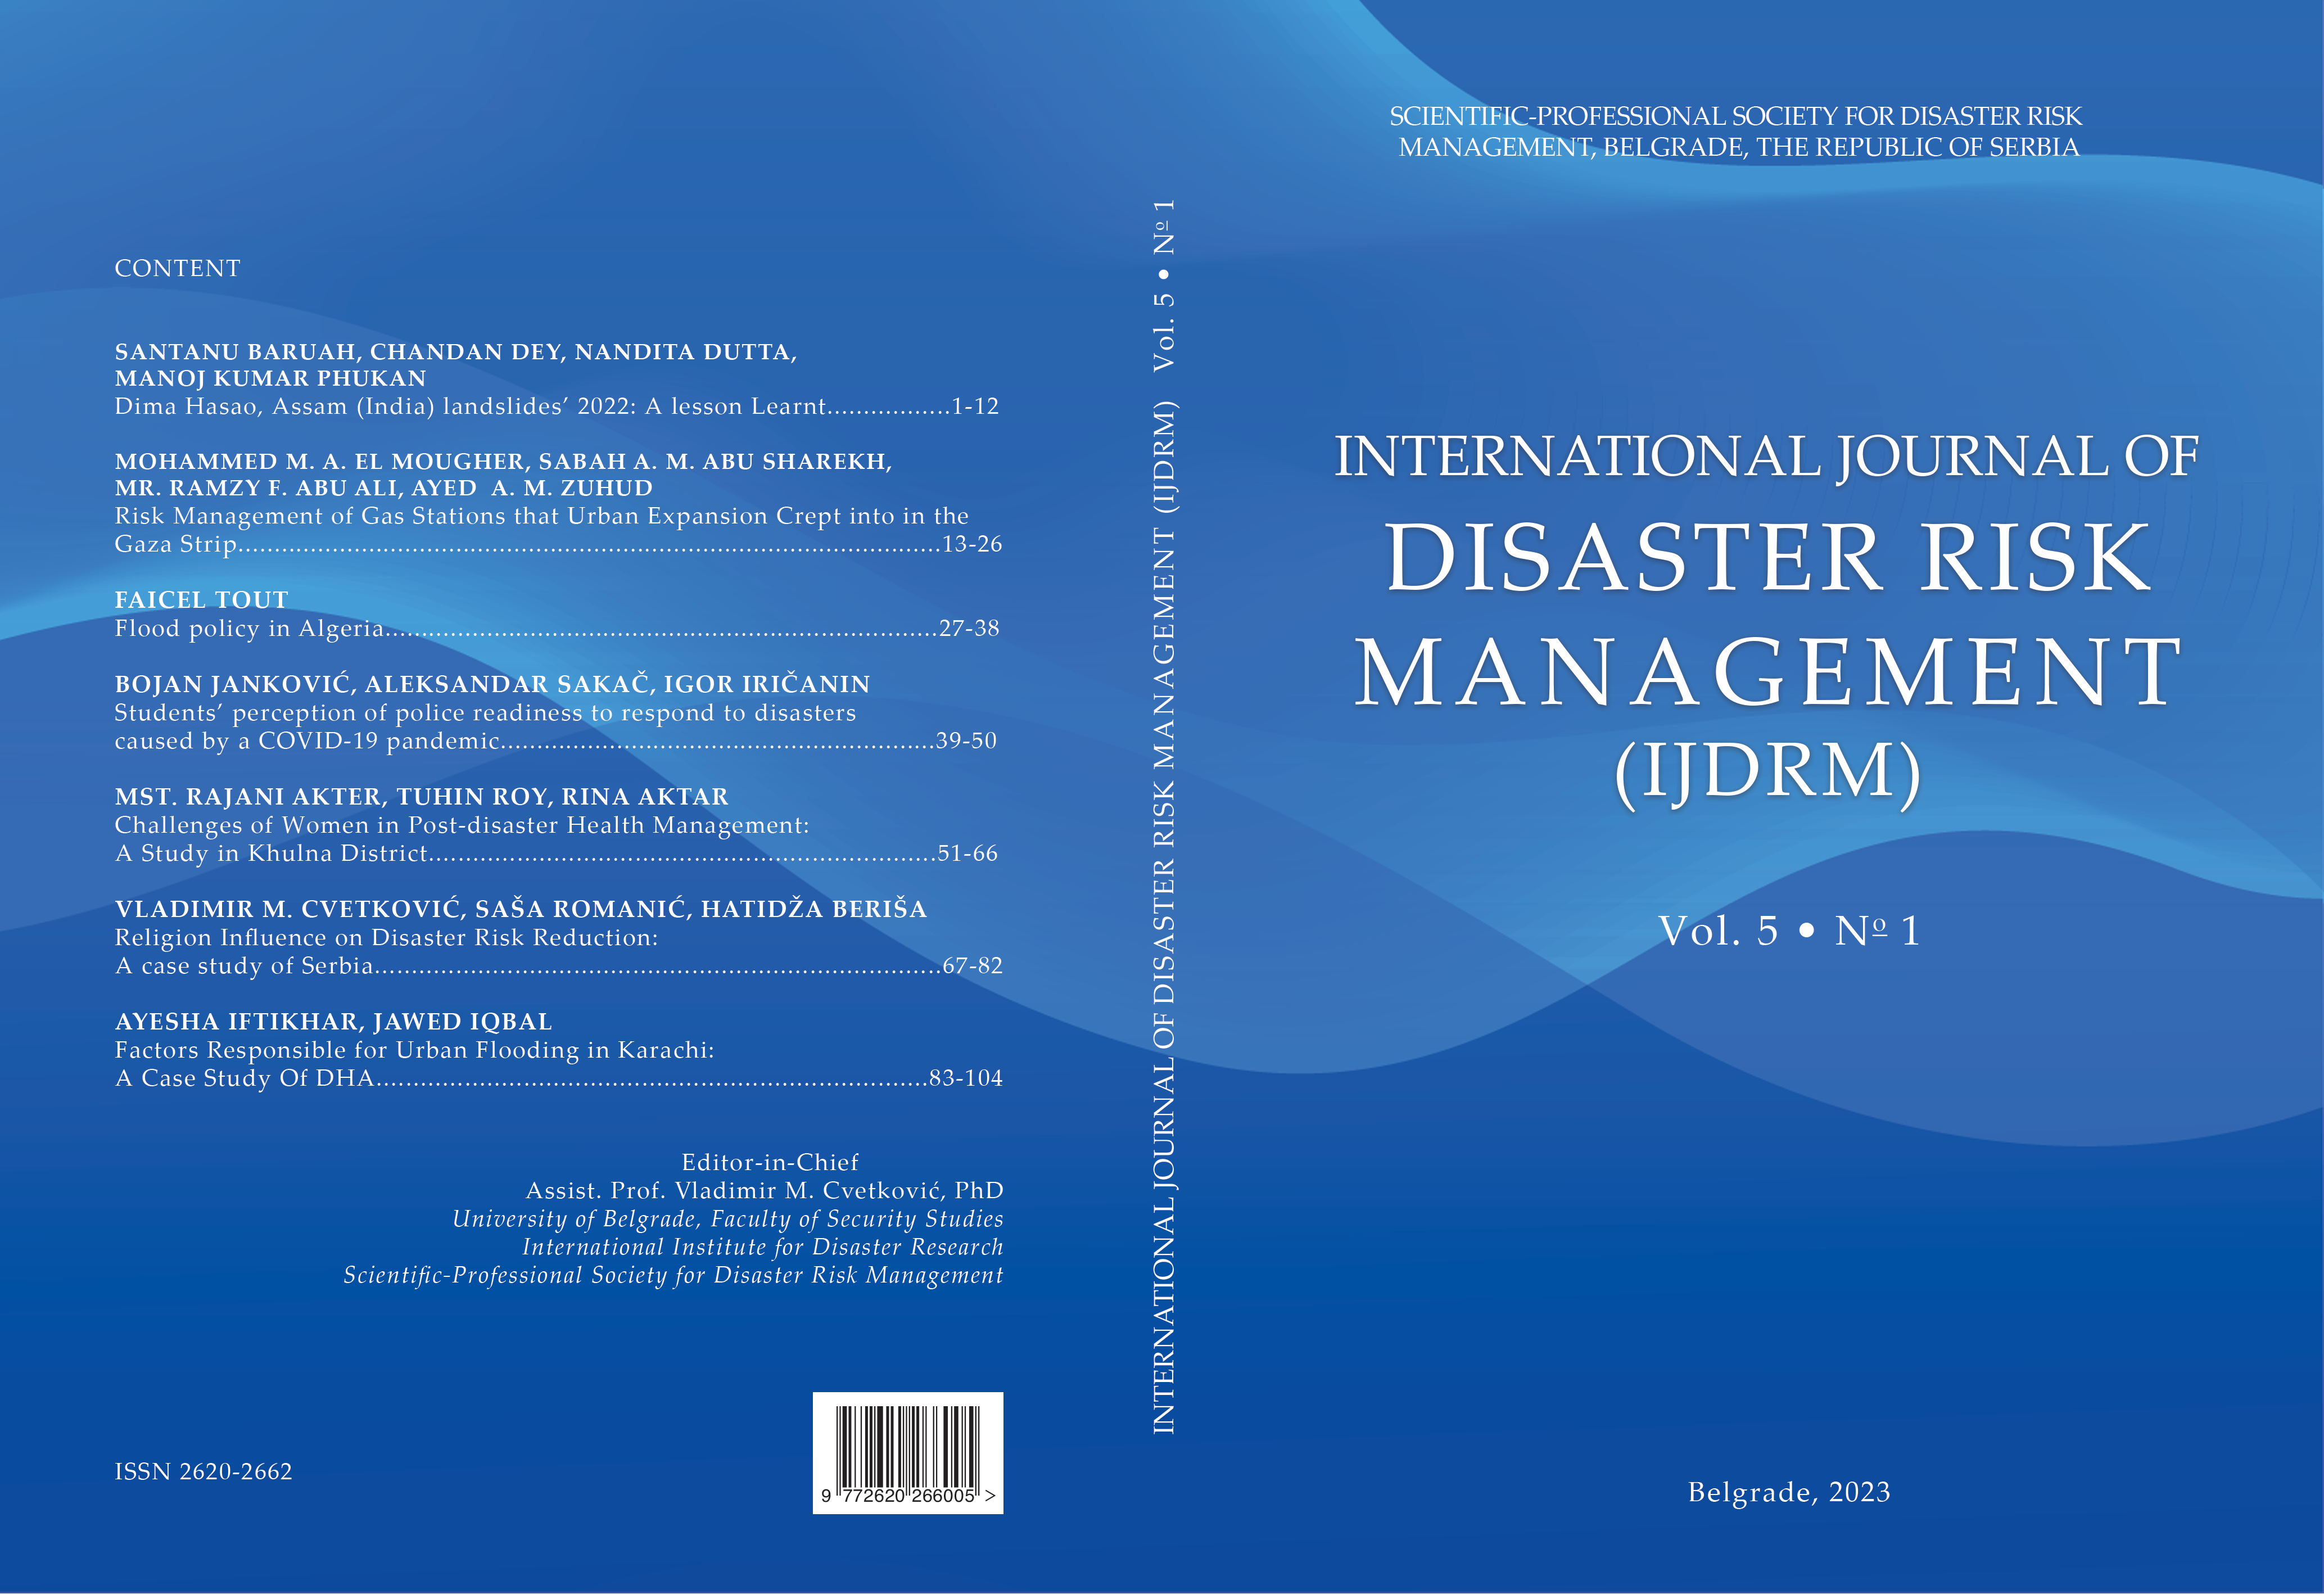 Religion Influence on Disaster Risk Reduction: A case study of Serbia Cover Image